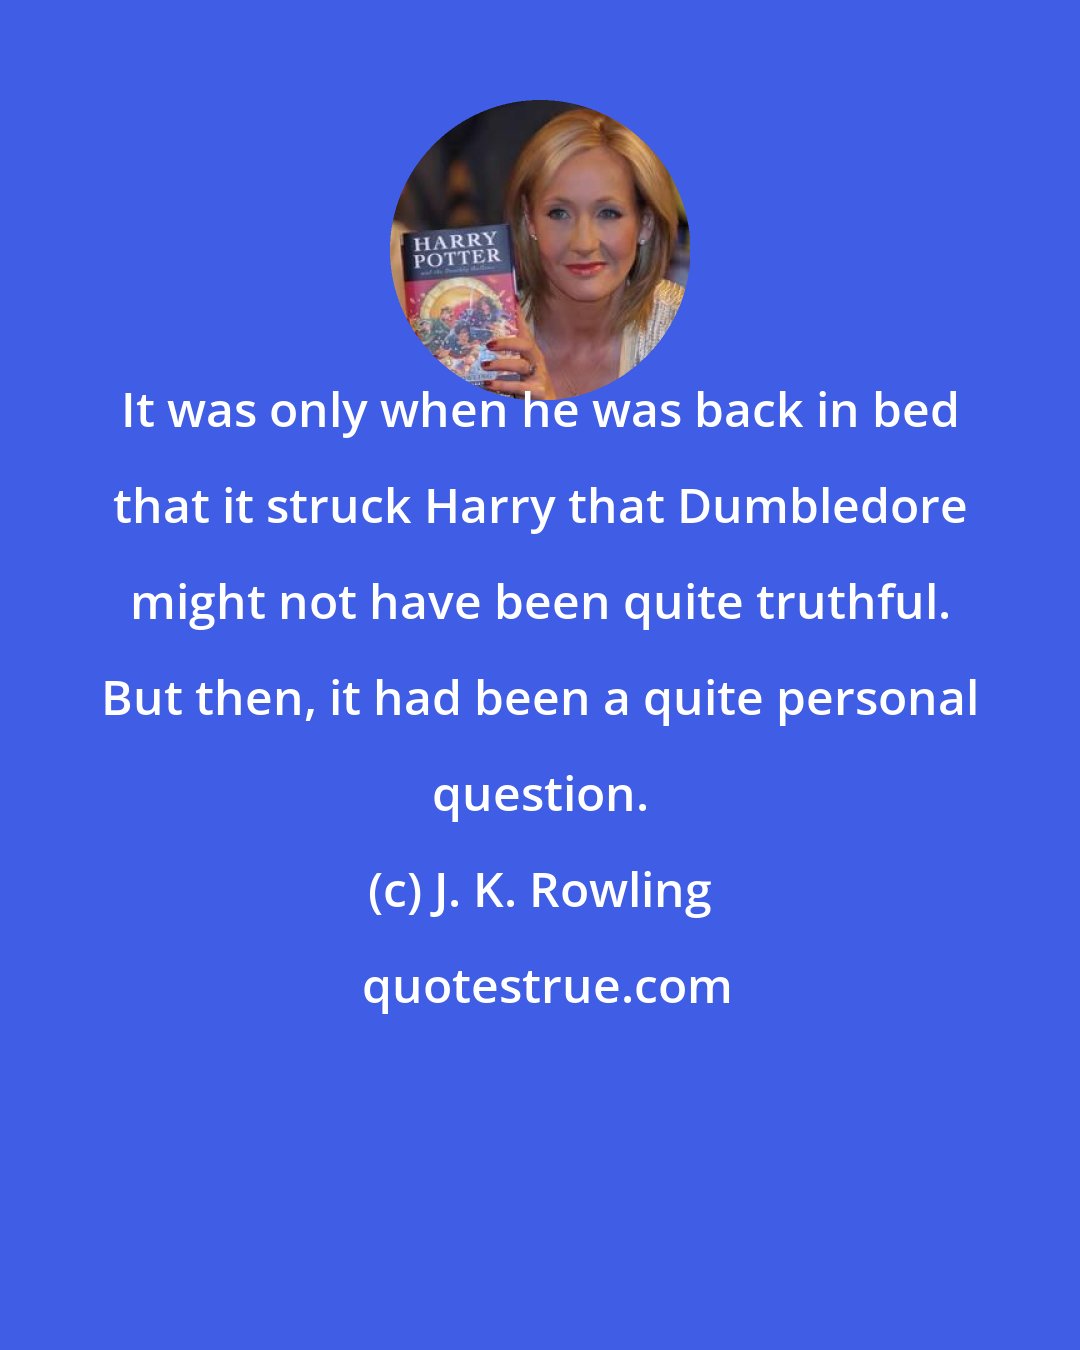 J. K. Rowling: It was only when he was back in bed that it struck Harry that Dumbledore might not have been quite truthful. But then, it had been a quite personal question.